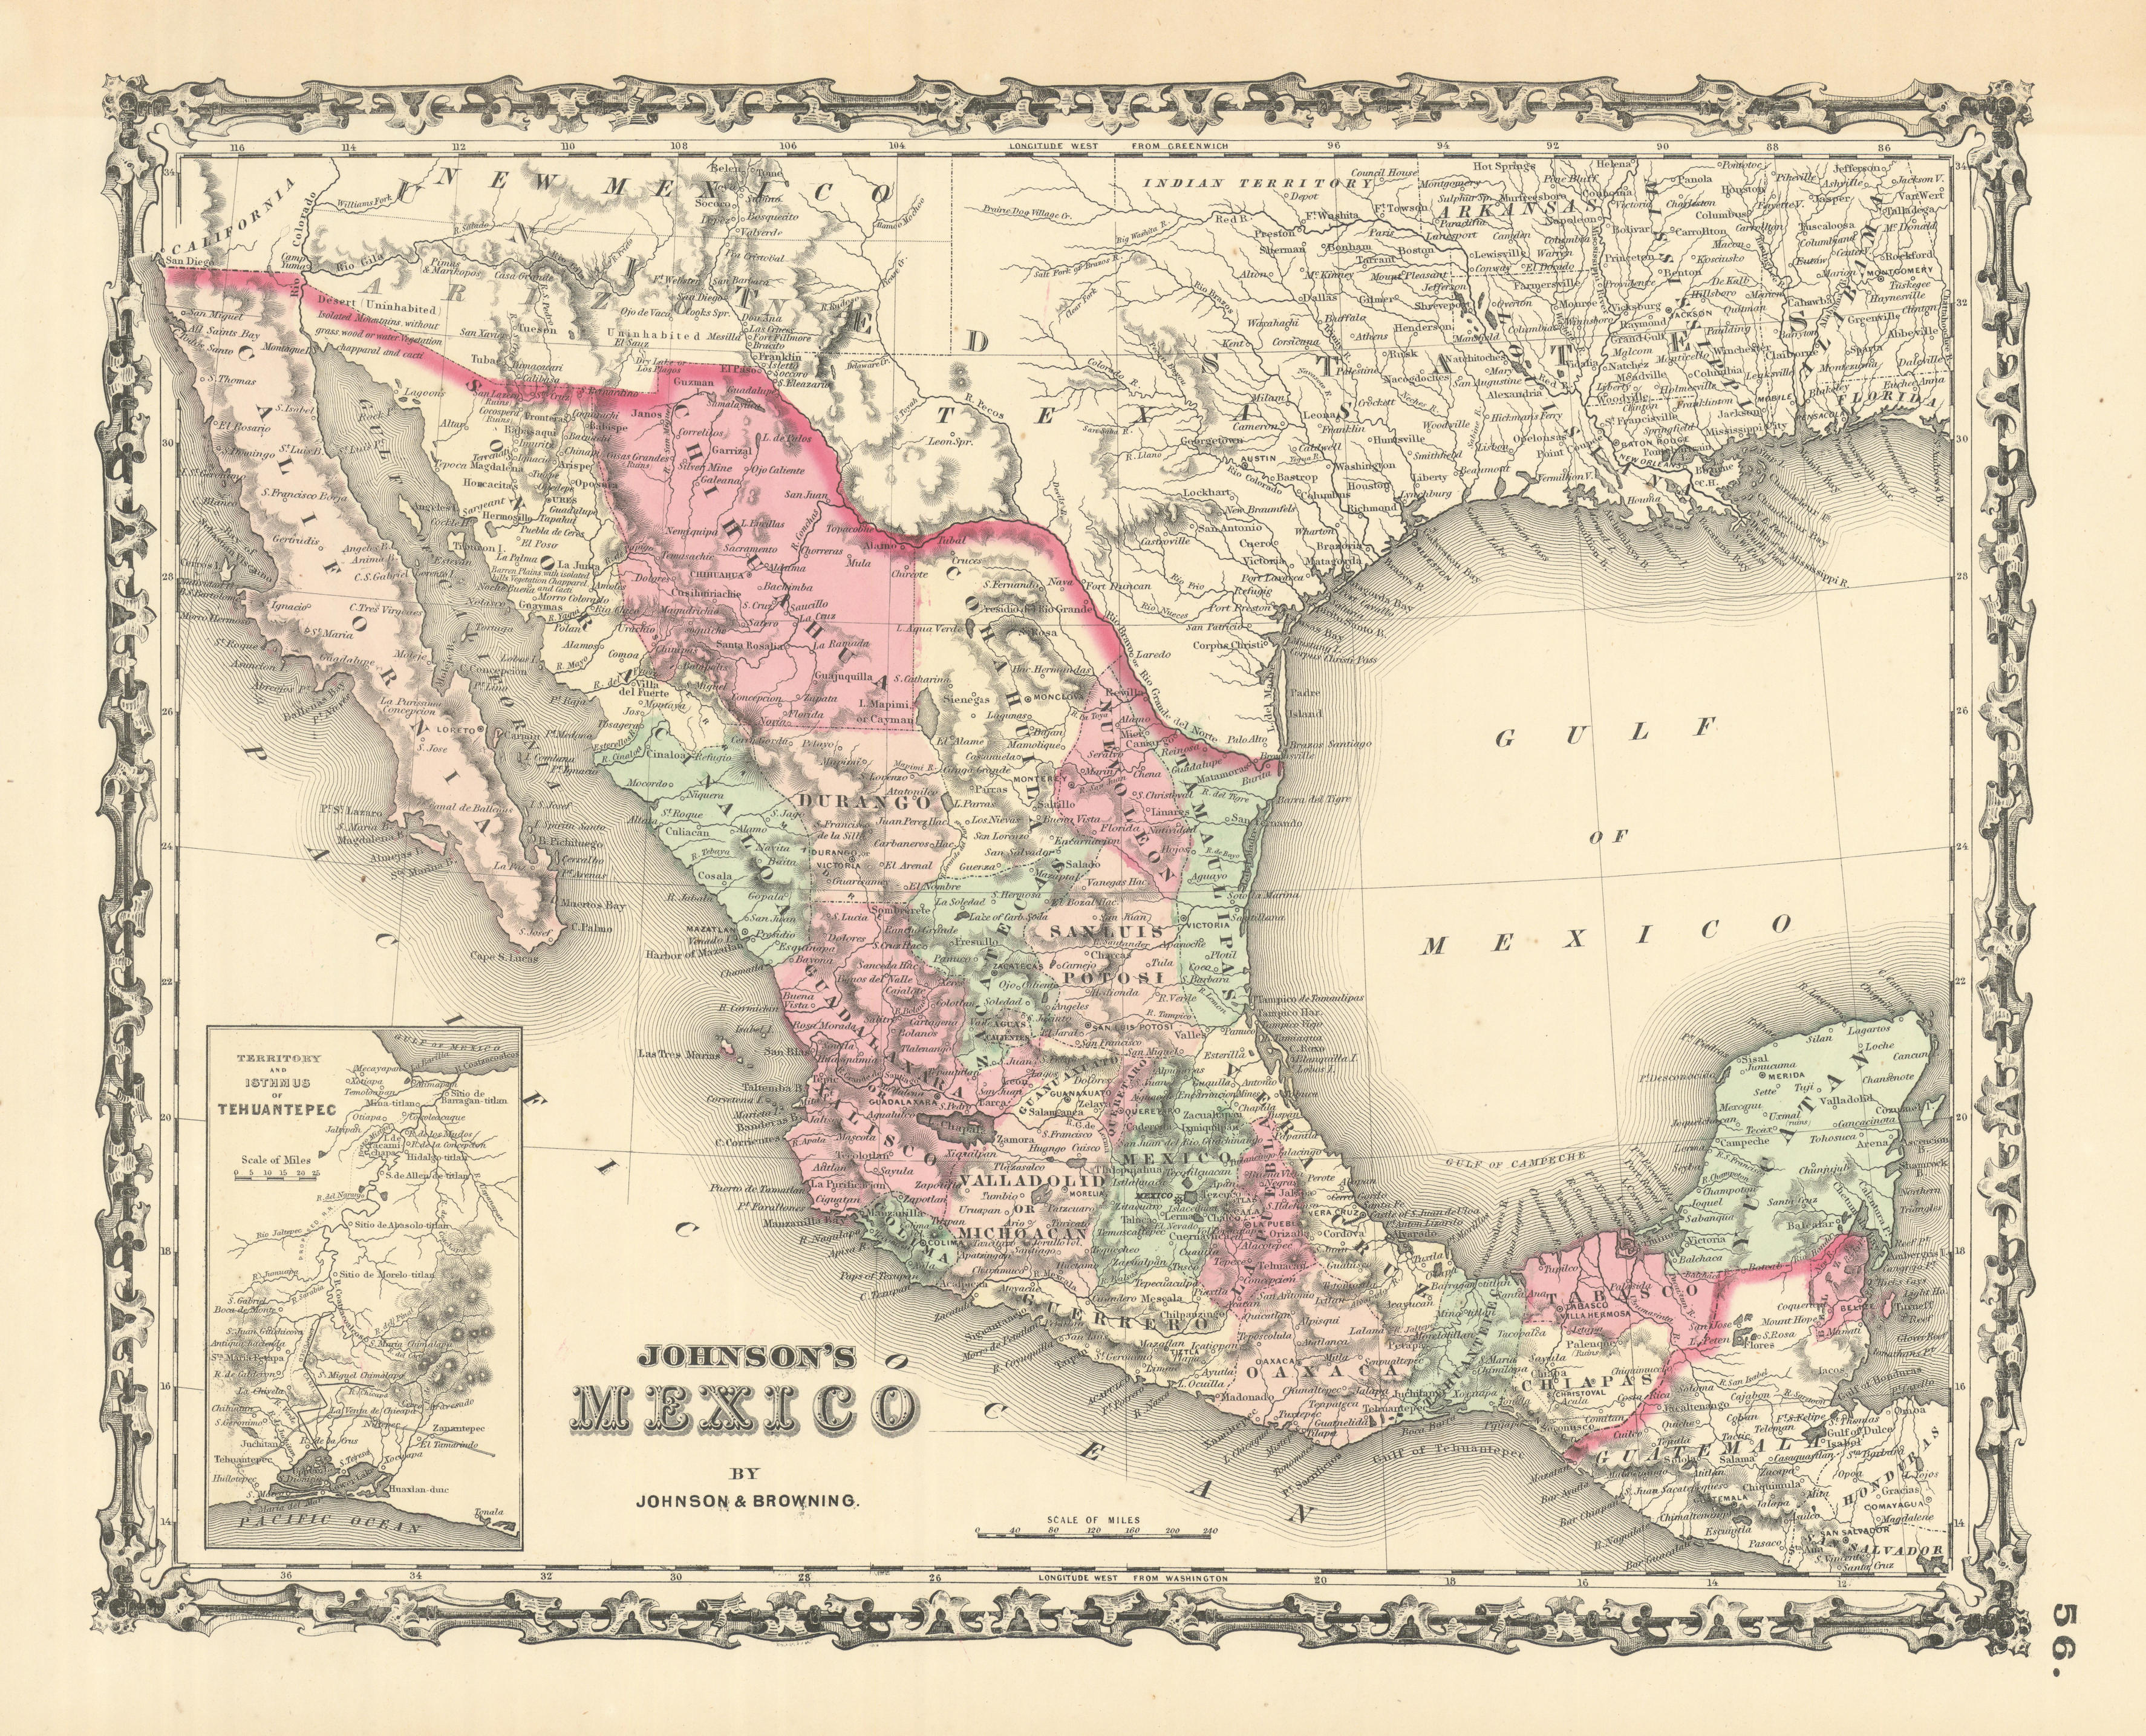 Associate Product Johnson's Mexico. States. Tehuantepec Isthmus 1861 old antique map plan chart